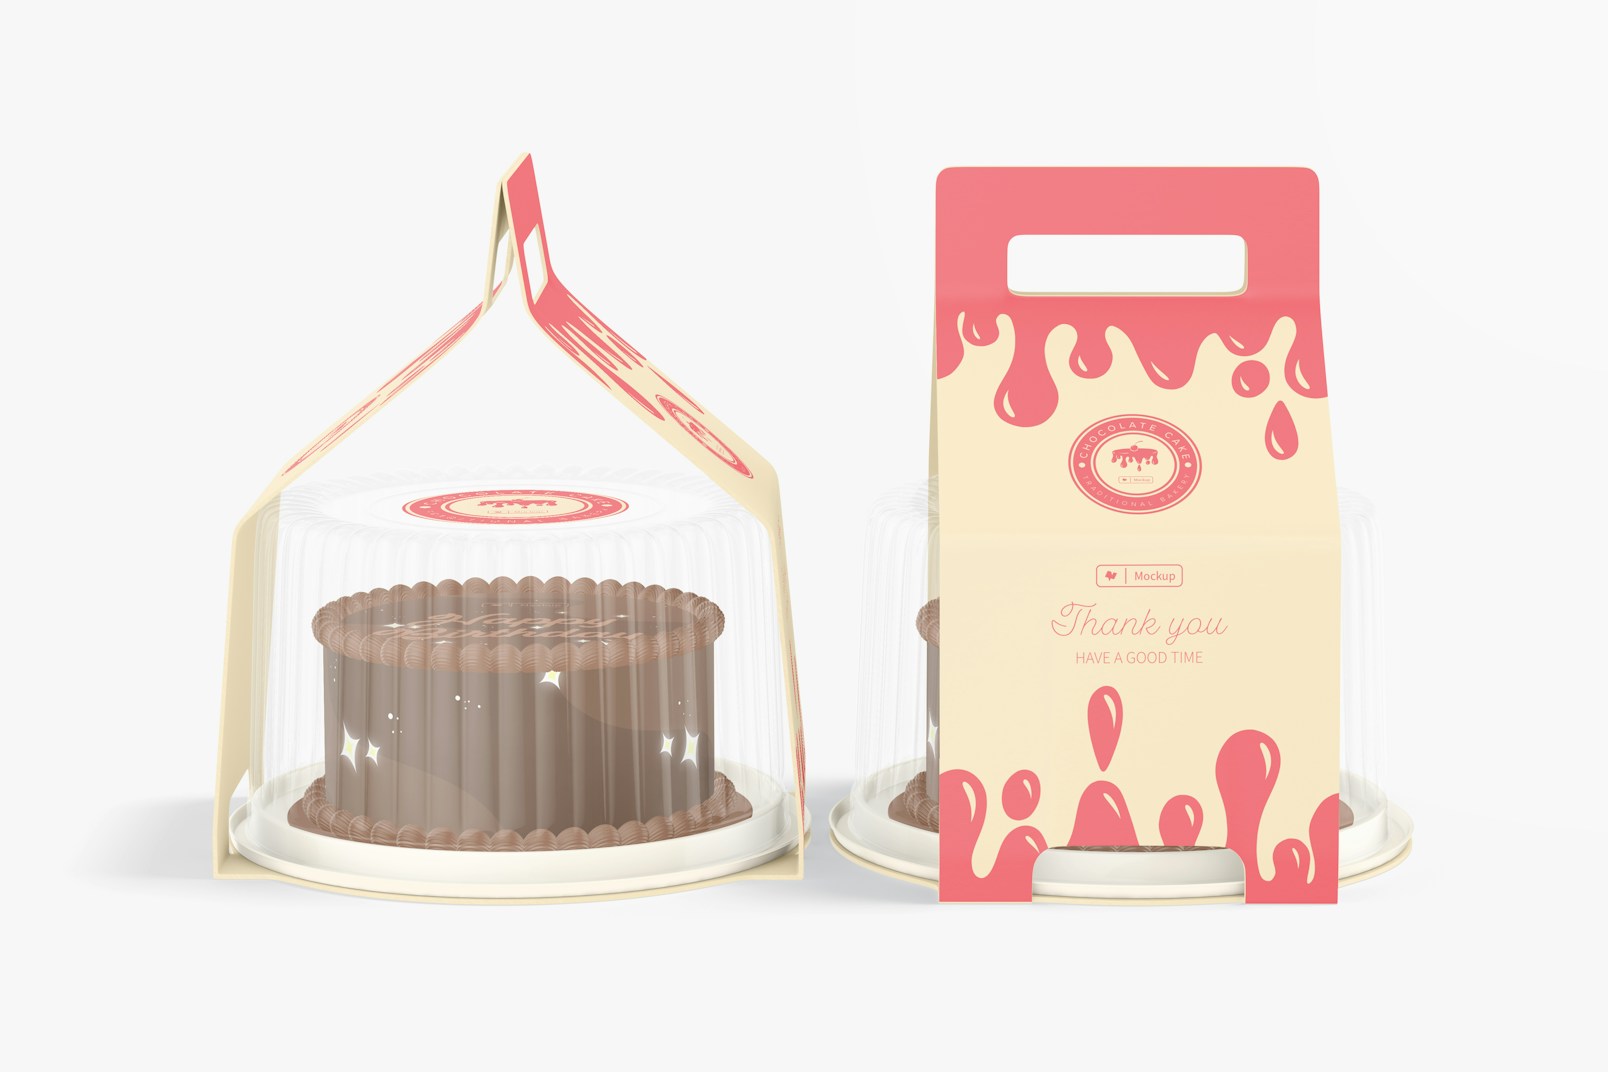 Portable Cake Packaging Mockup, Front and Side View